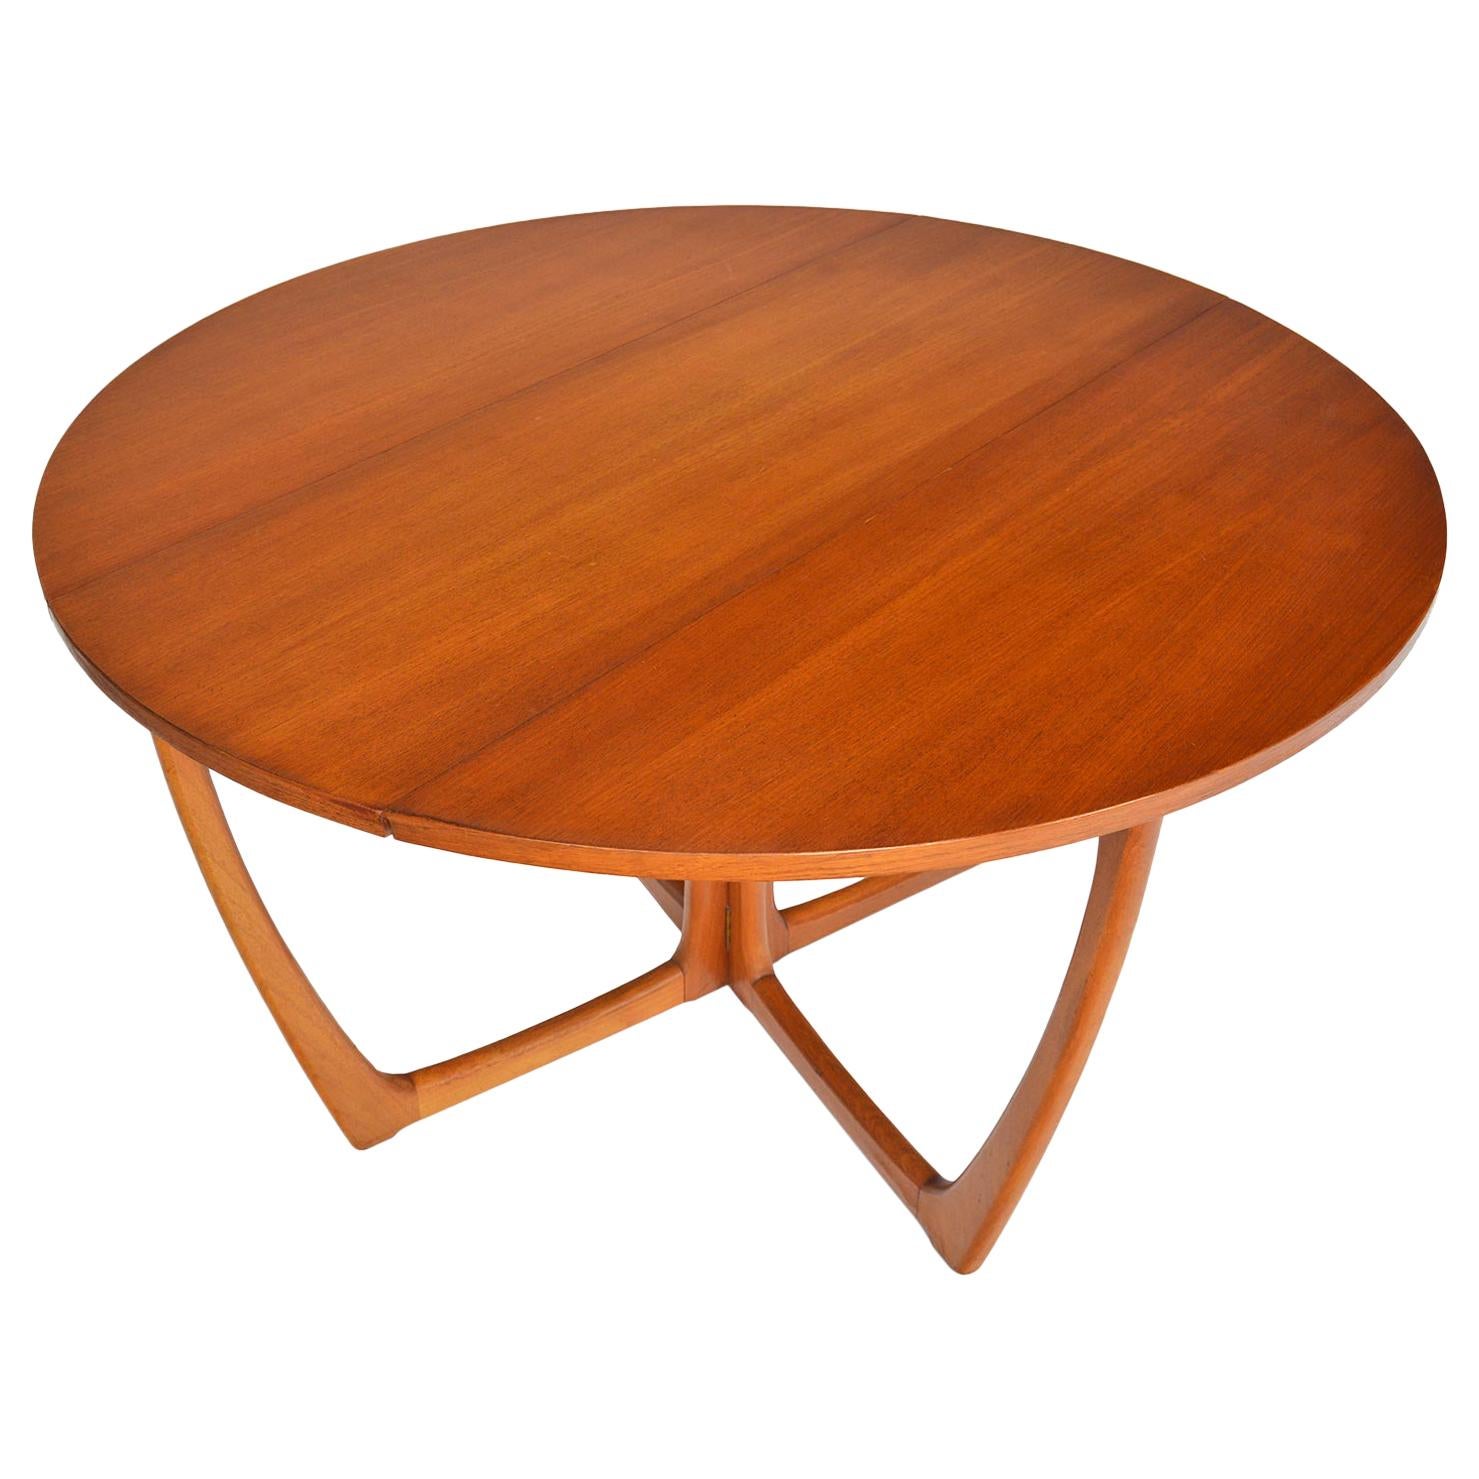 Round Drop-Leaf Dining Table by Beithcraft